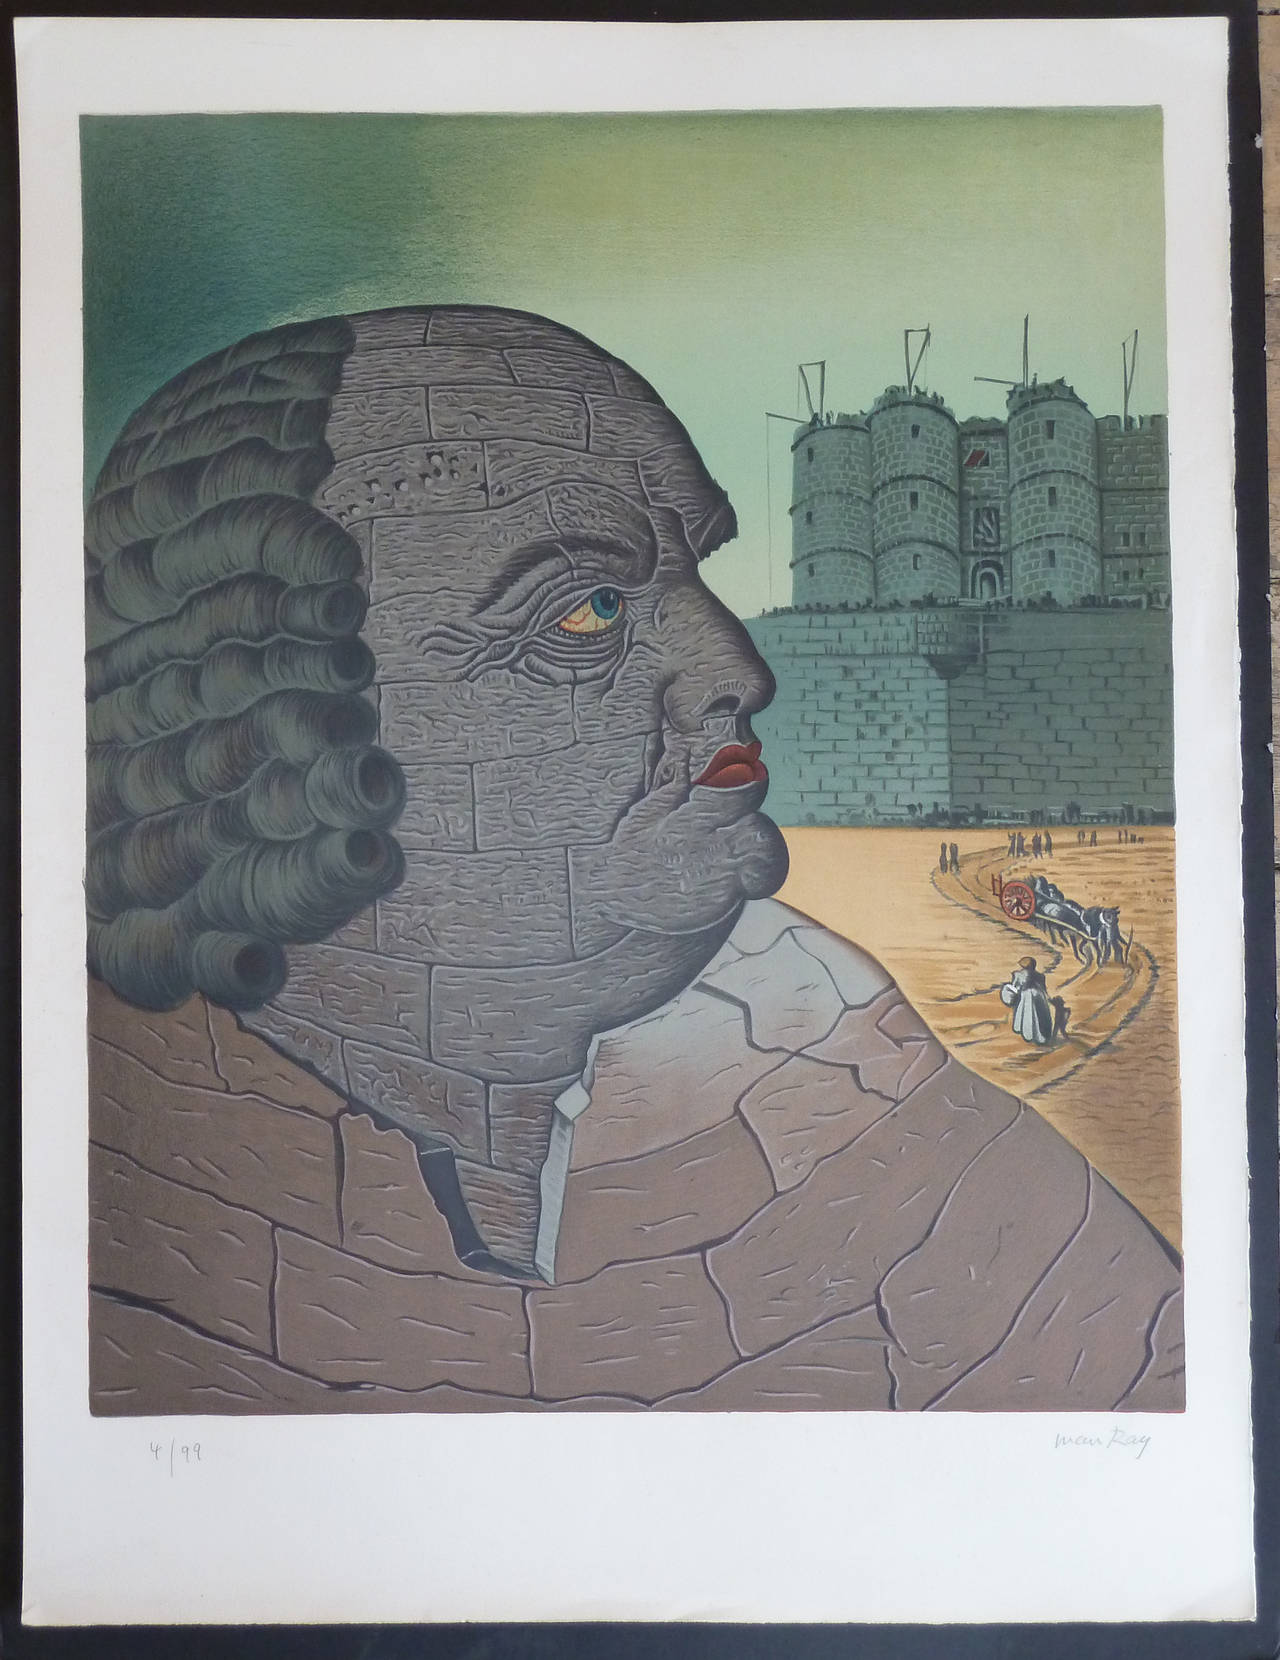 Imaginary Portrait of The Marquis de Sade - Print by Man Ray